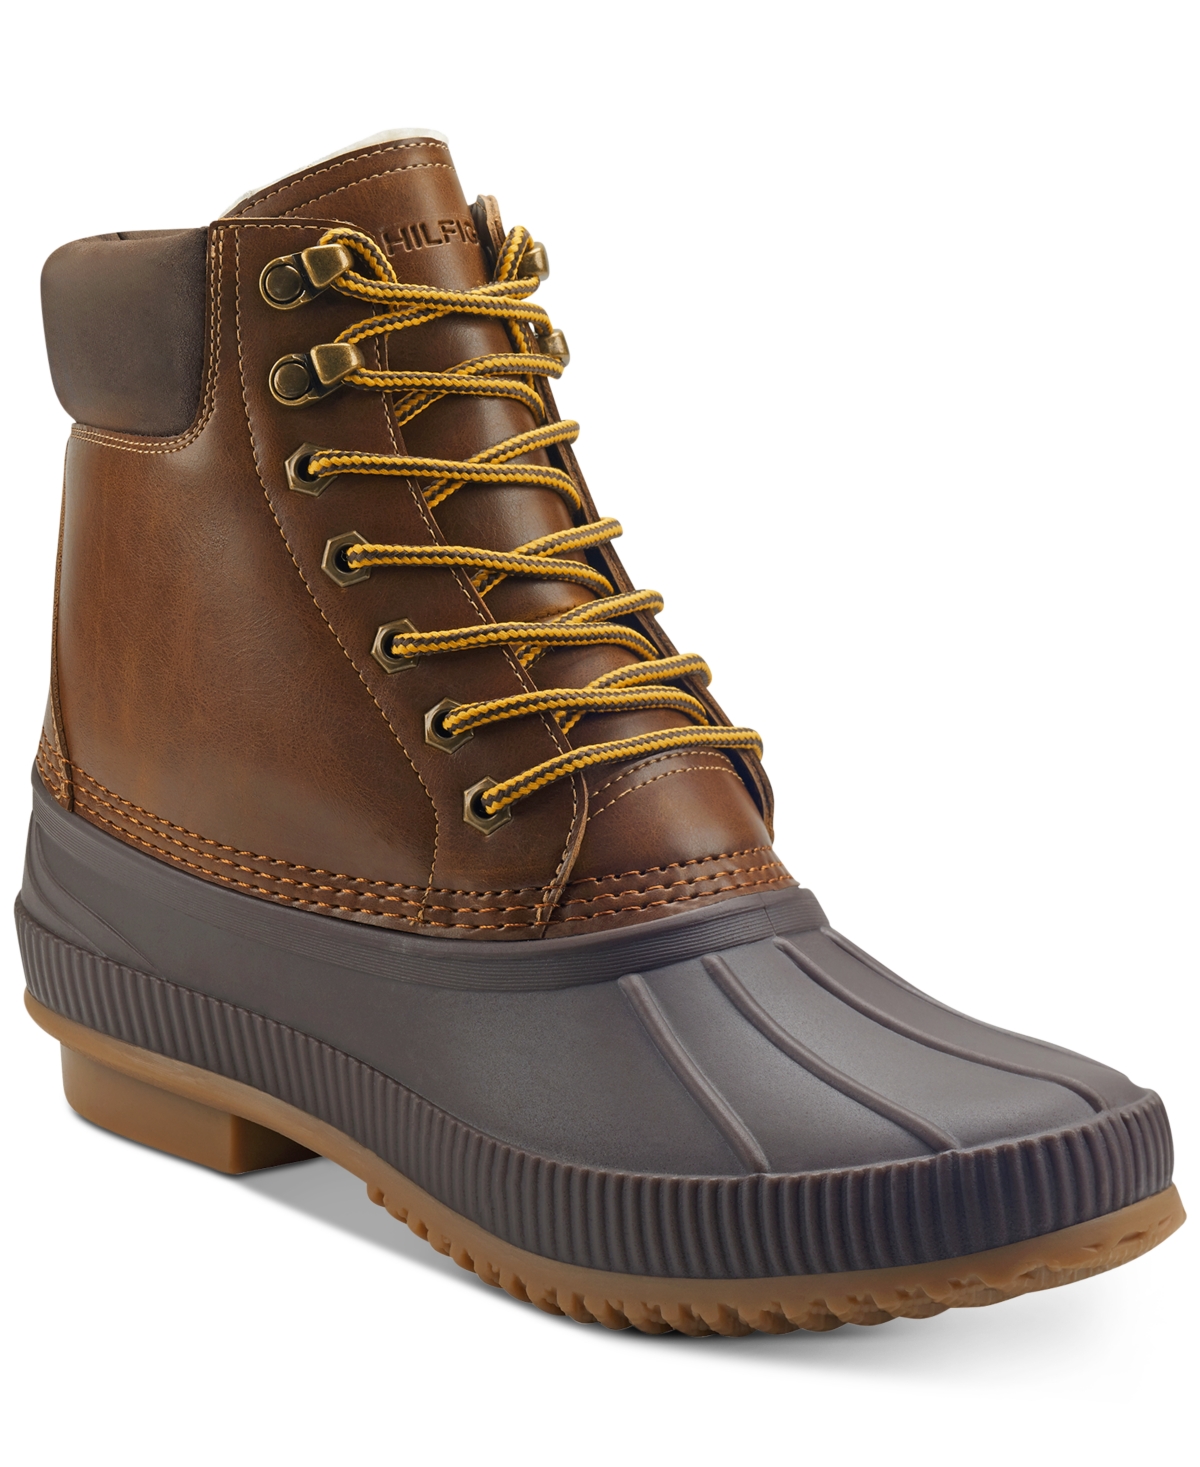 UPC 194009398708 product image for Tommy Hilfiger Men's Colins 2 Waterproof Duck Boots Men's Shoes | upcitemdb.com